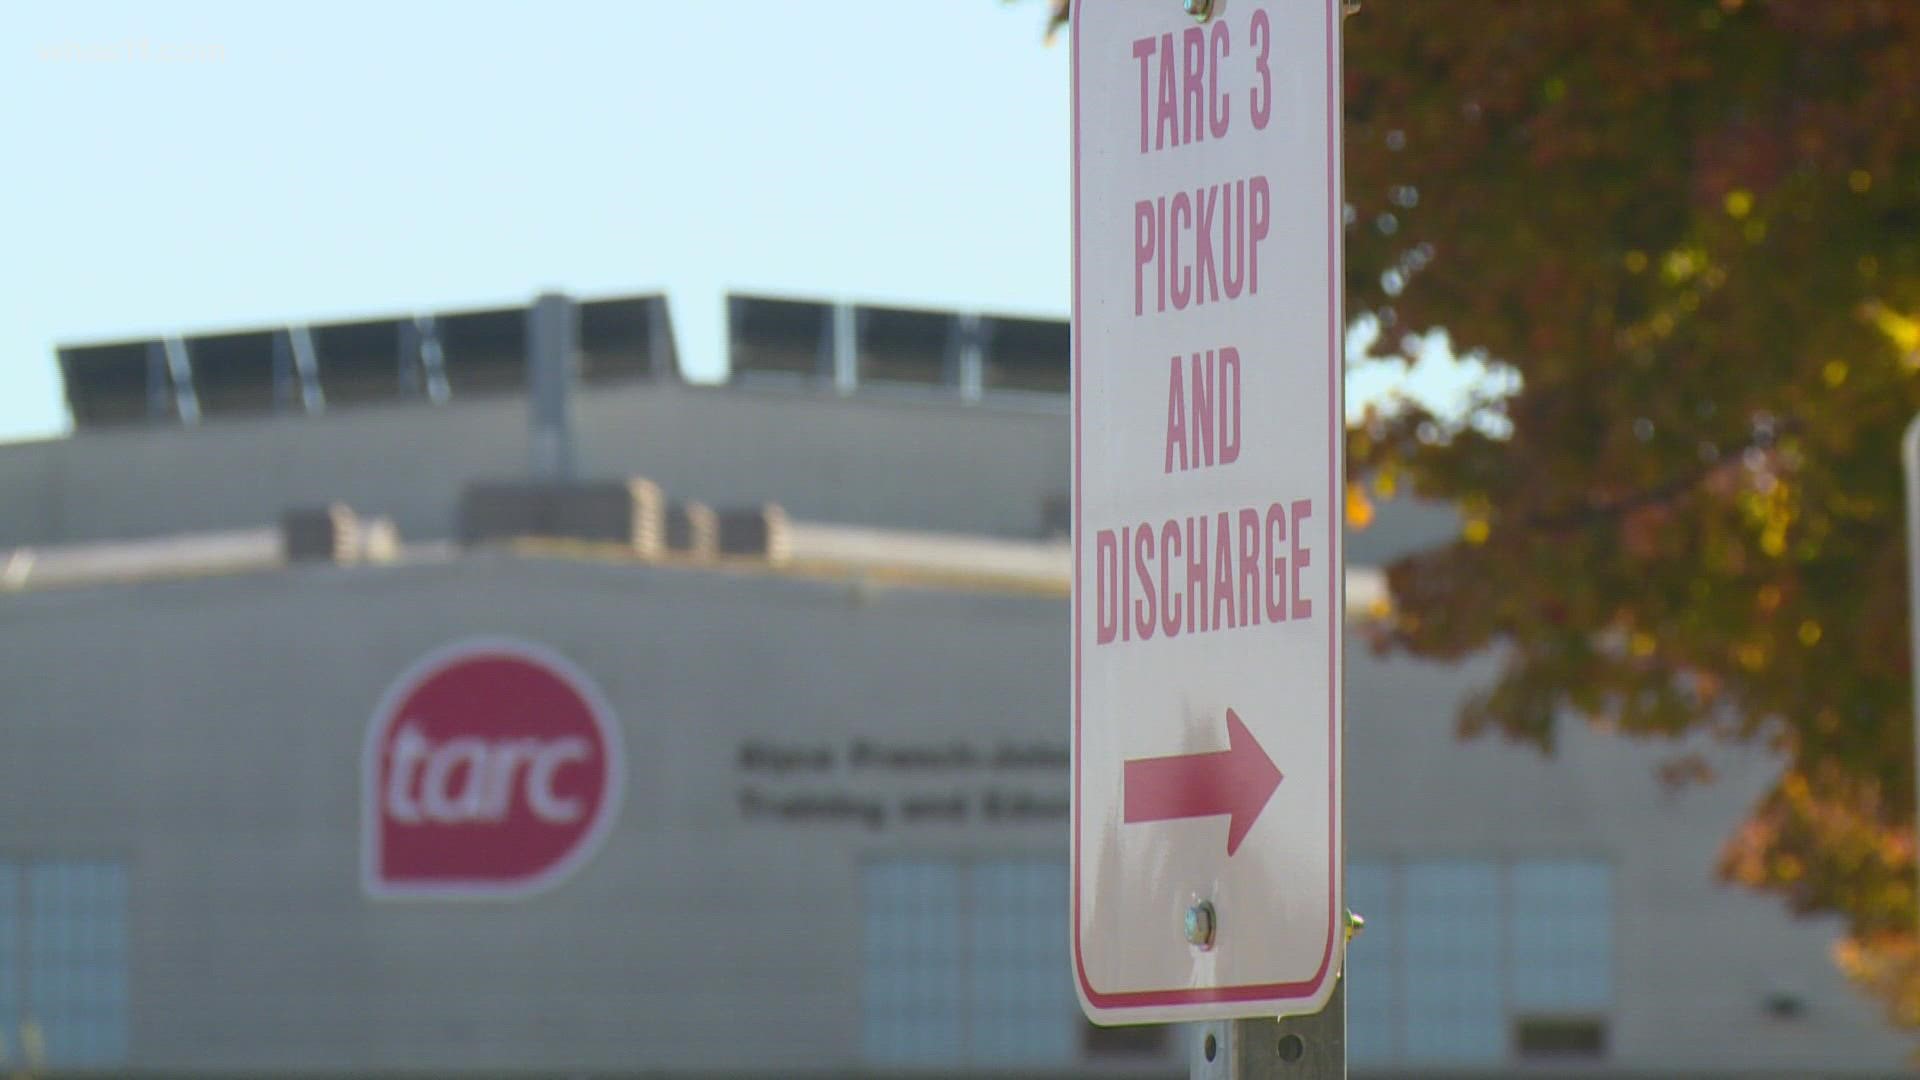 TARC leaders are encouraging TARC-3 riders and those with disabilities to only book essential trips if possible.